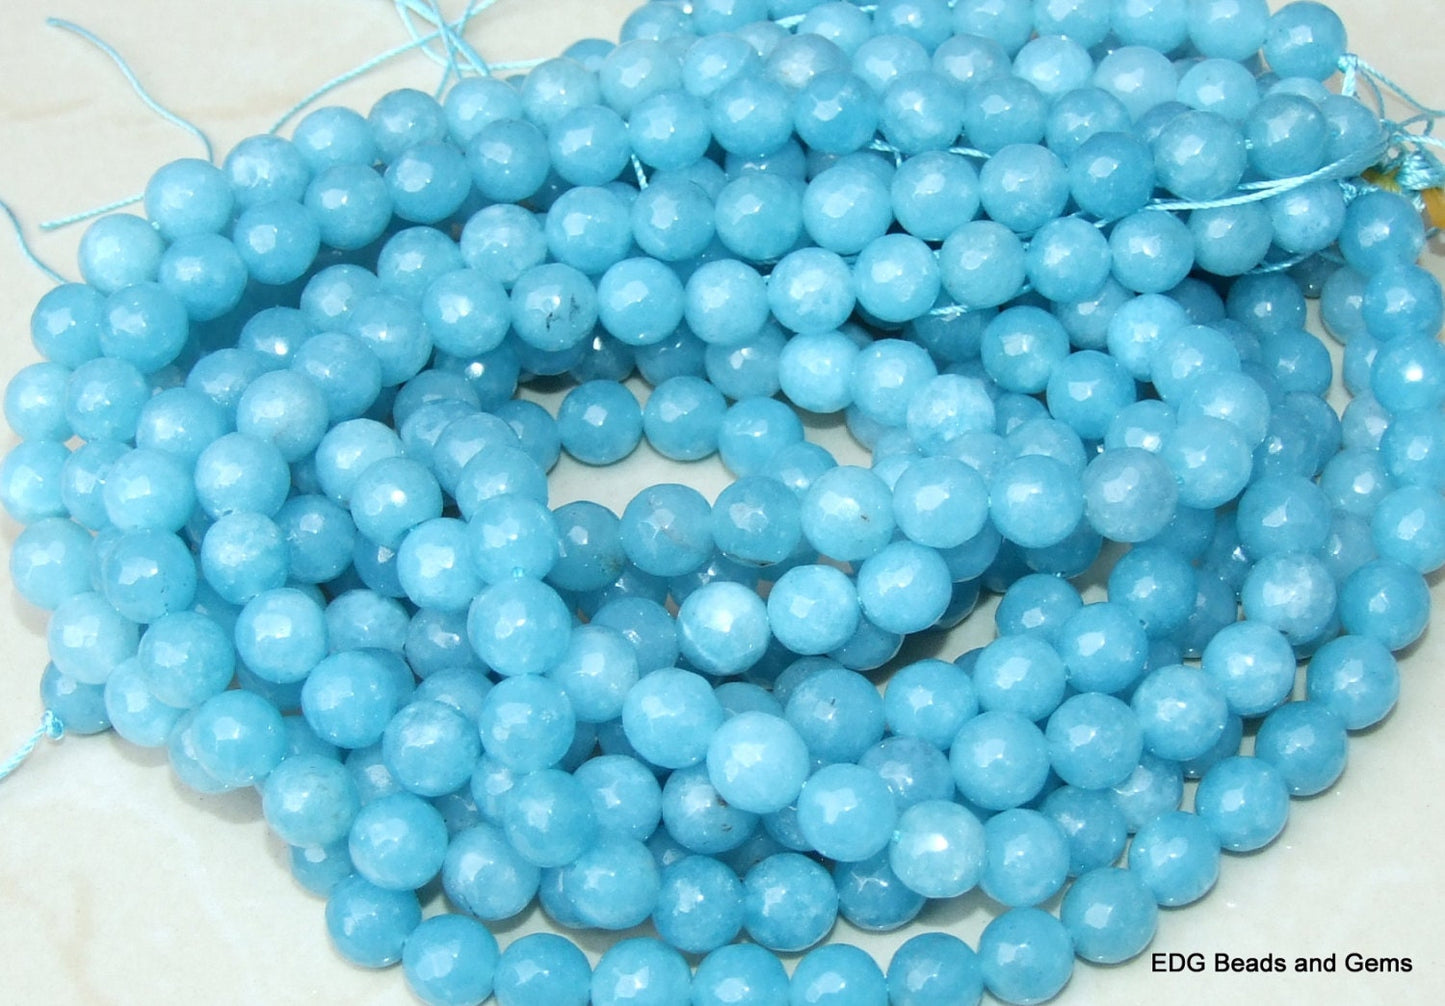 Larimar Blue Jade Faceted Beads - Gemstone Beads - 8mm and 10mm - Jade Beads - Jewelry Beads - 15 inch Strand